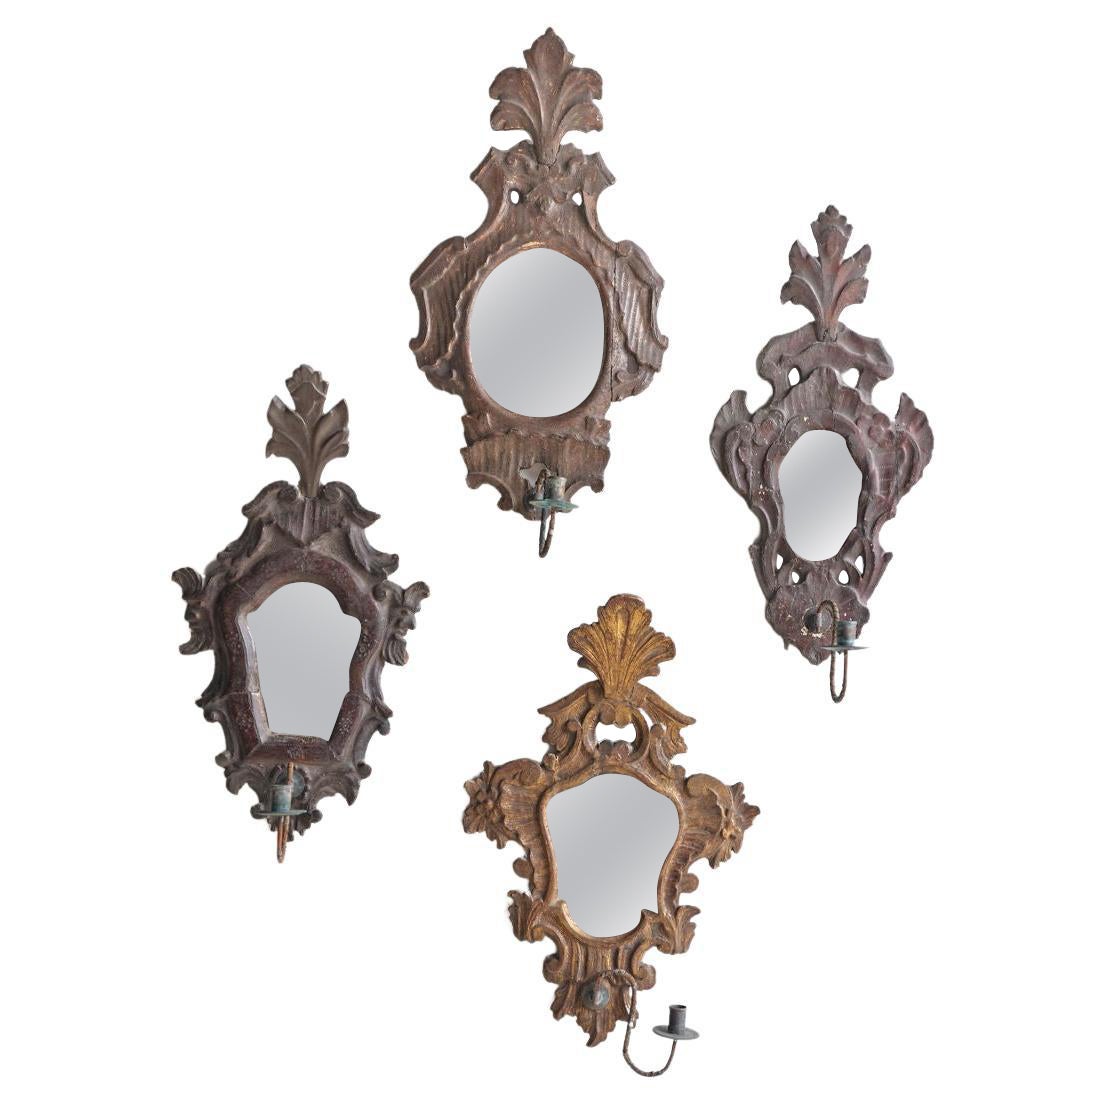 4 Mirrored Wall Sconces